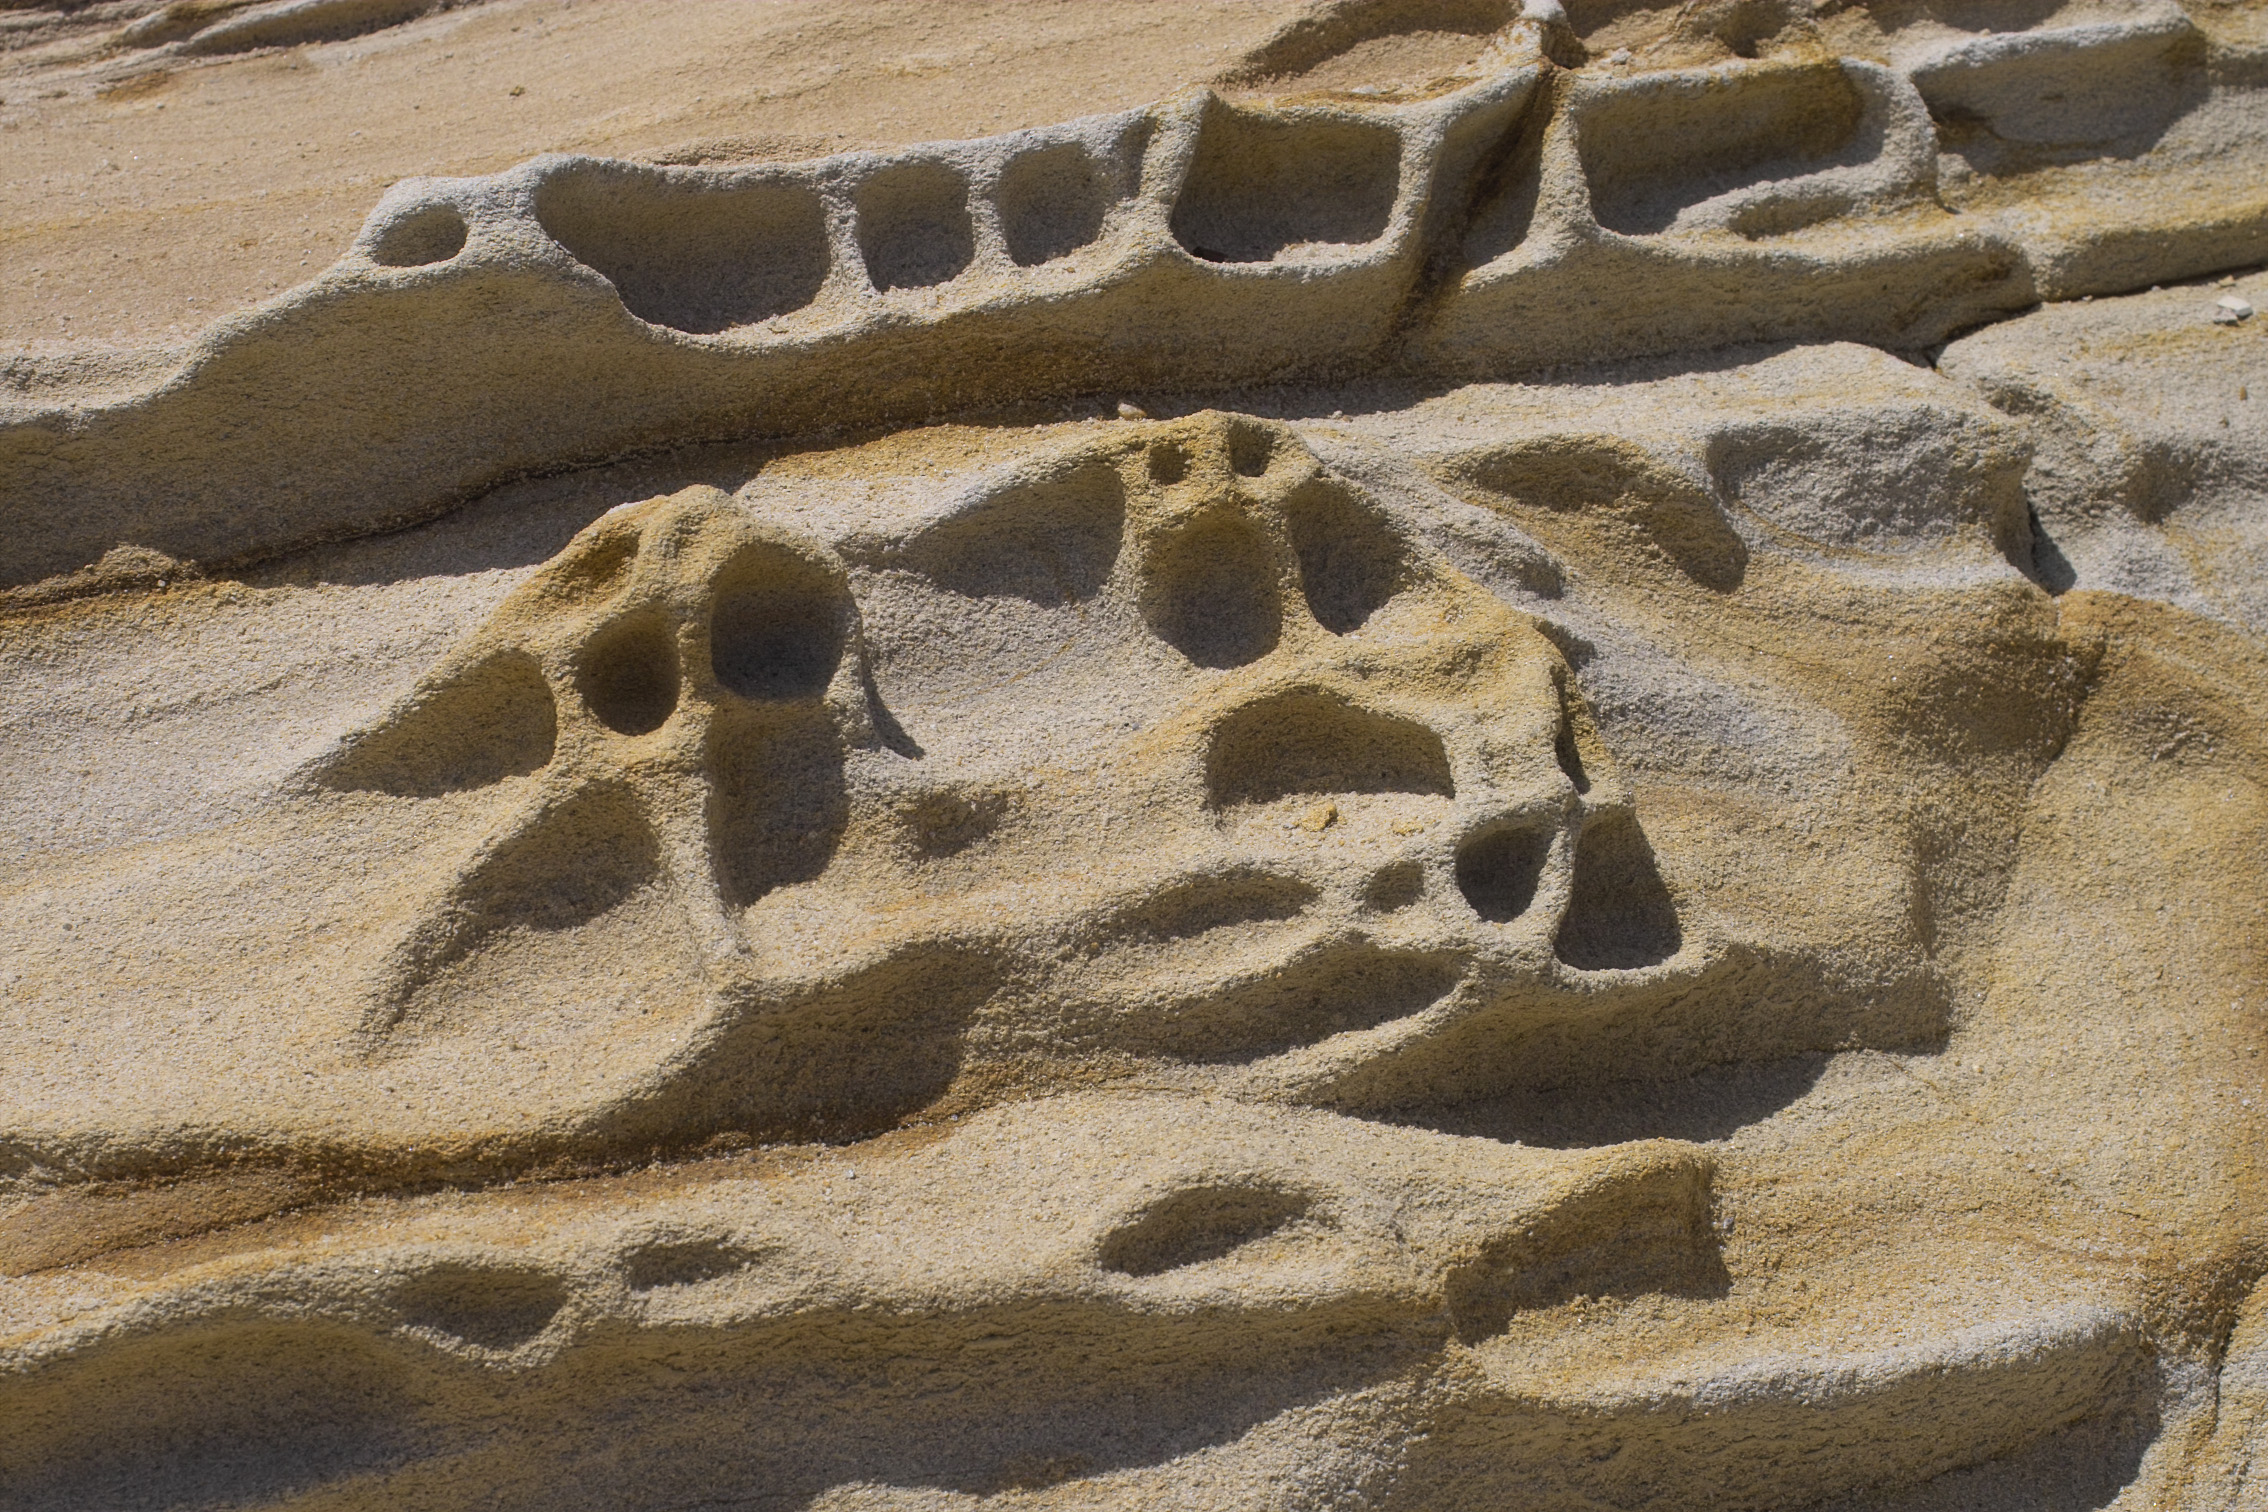 sandstone etched by the wind